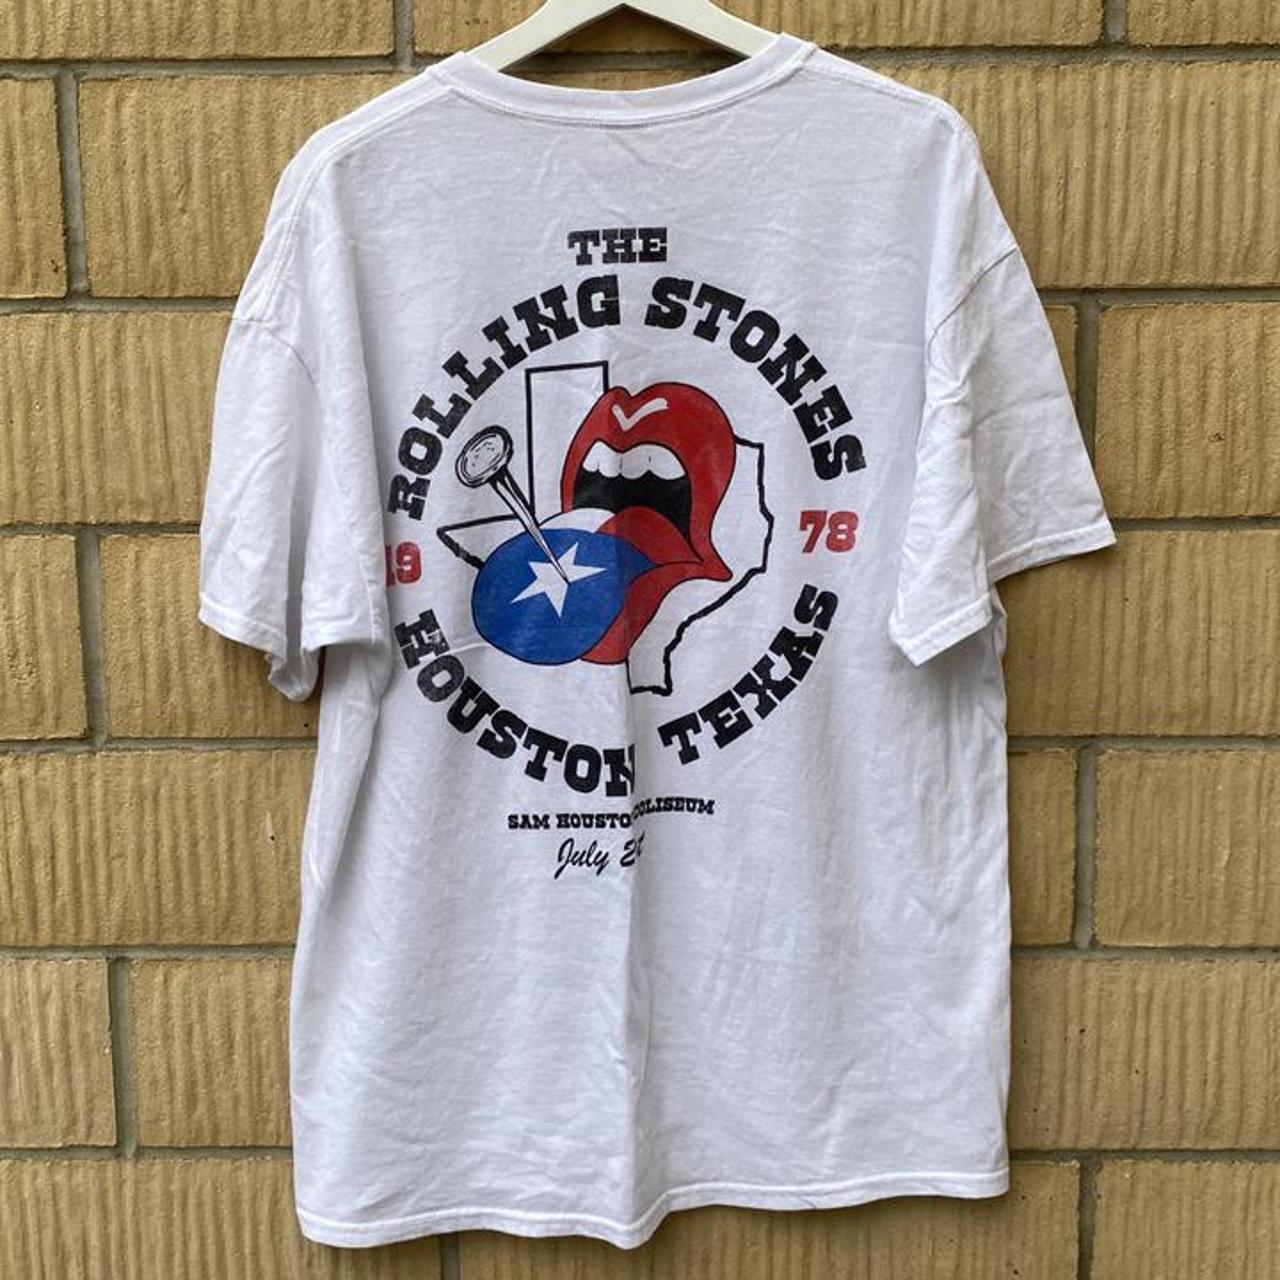 Product Image 2 - The Rolling Stones white 78